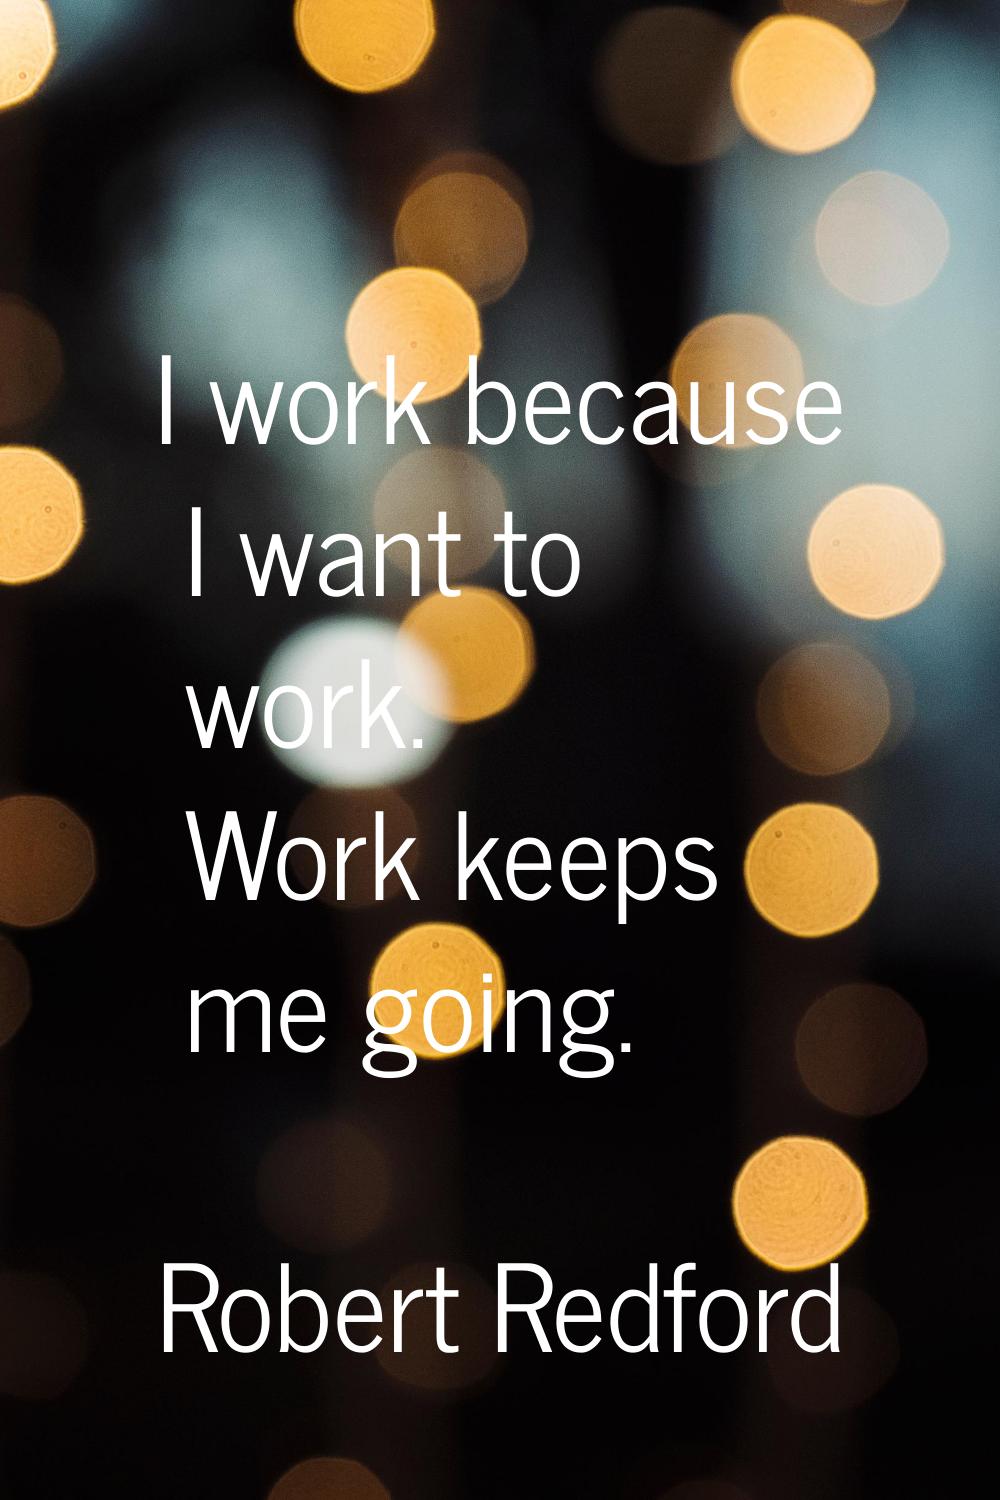 I work because I want to work. Work keeps me going.